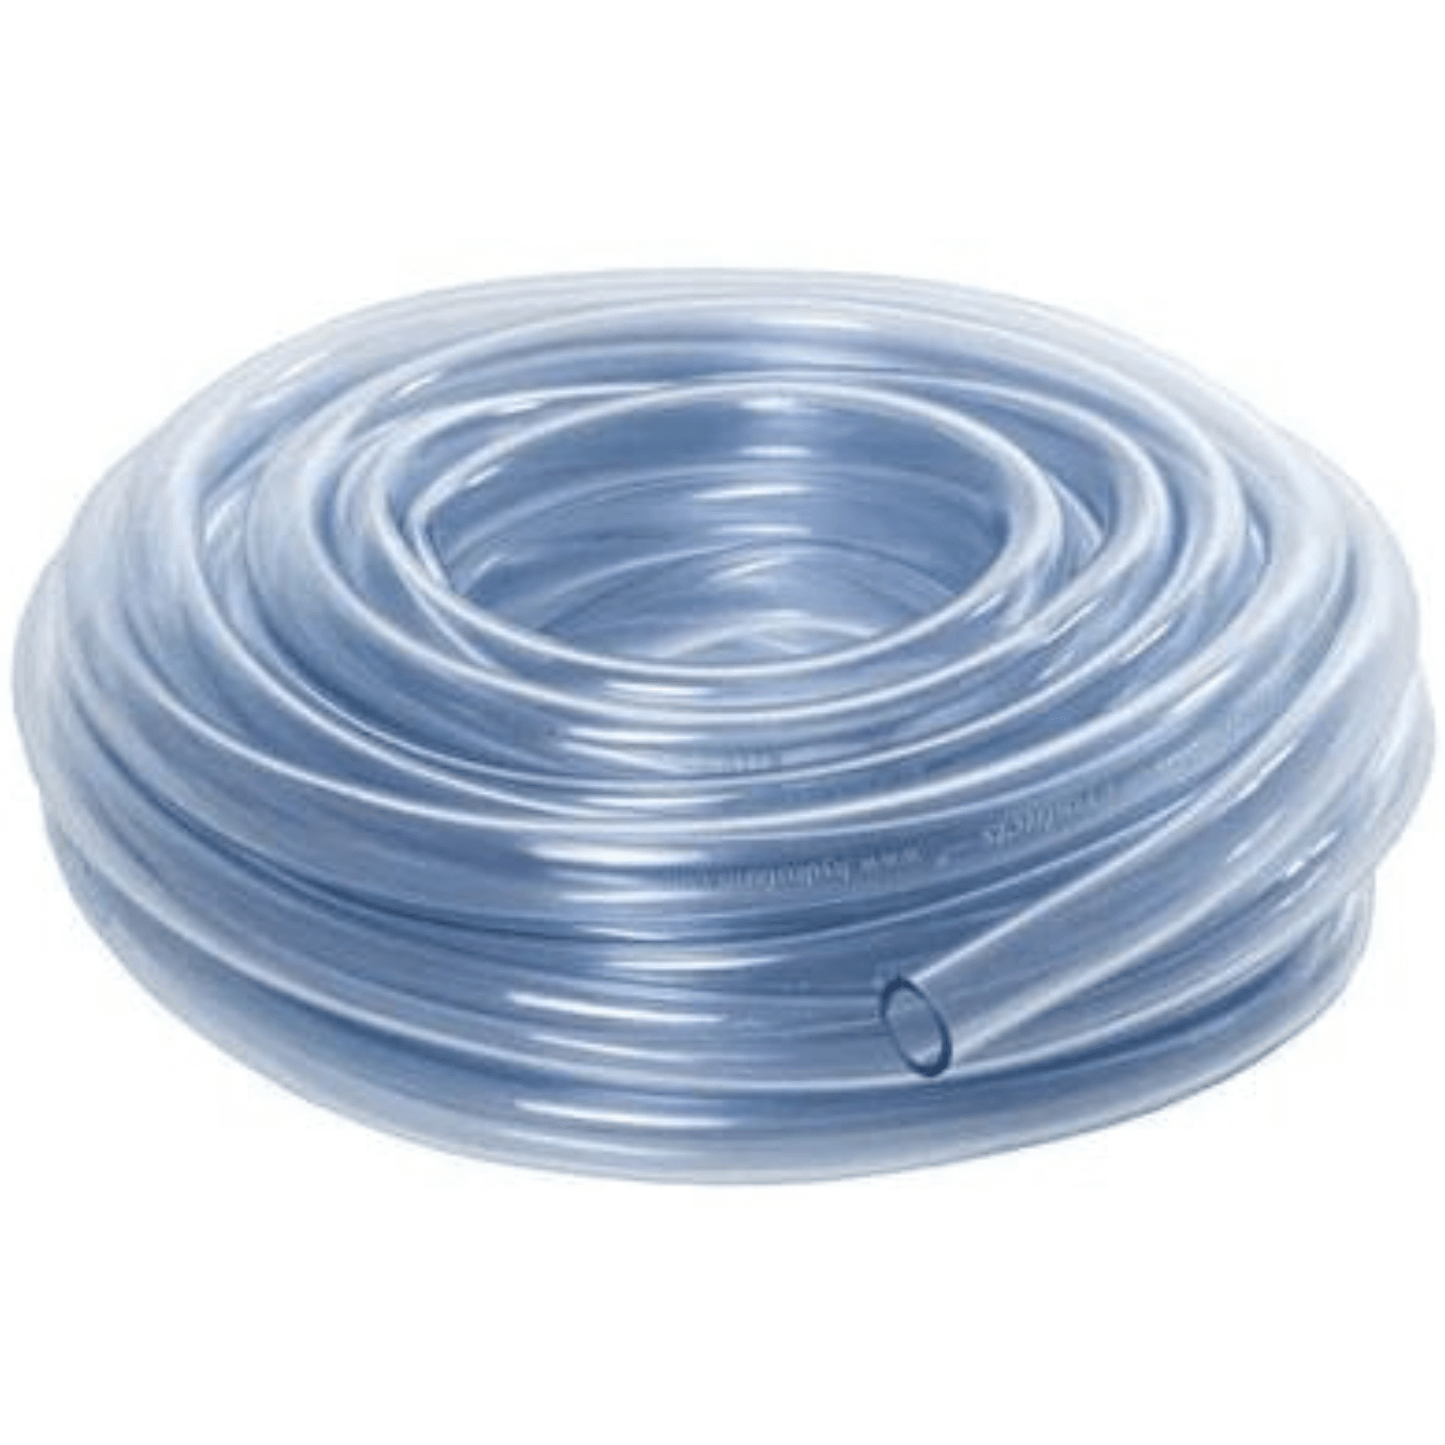 Active Aqua 1/4" OD Clear Irrigation Tubing, 100' HGTB14 Planting & Watering